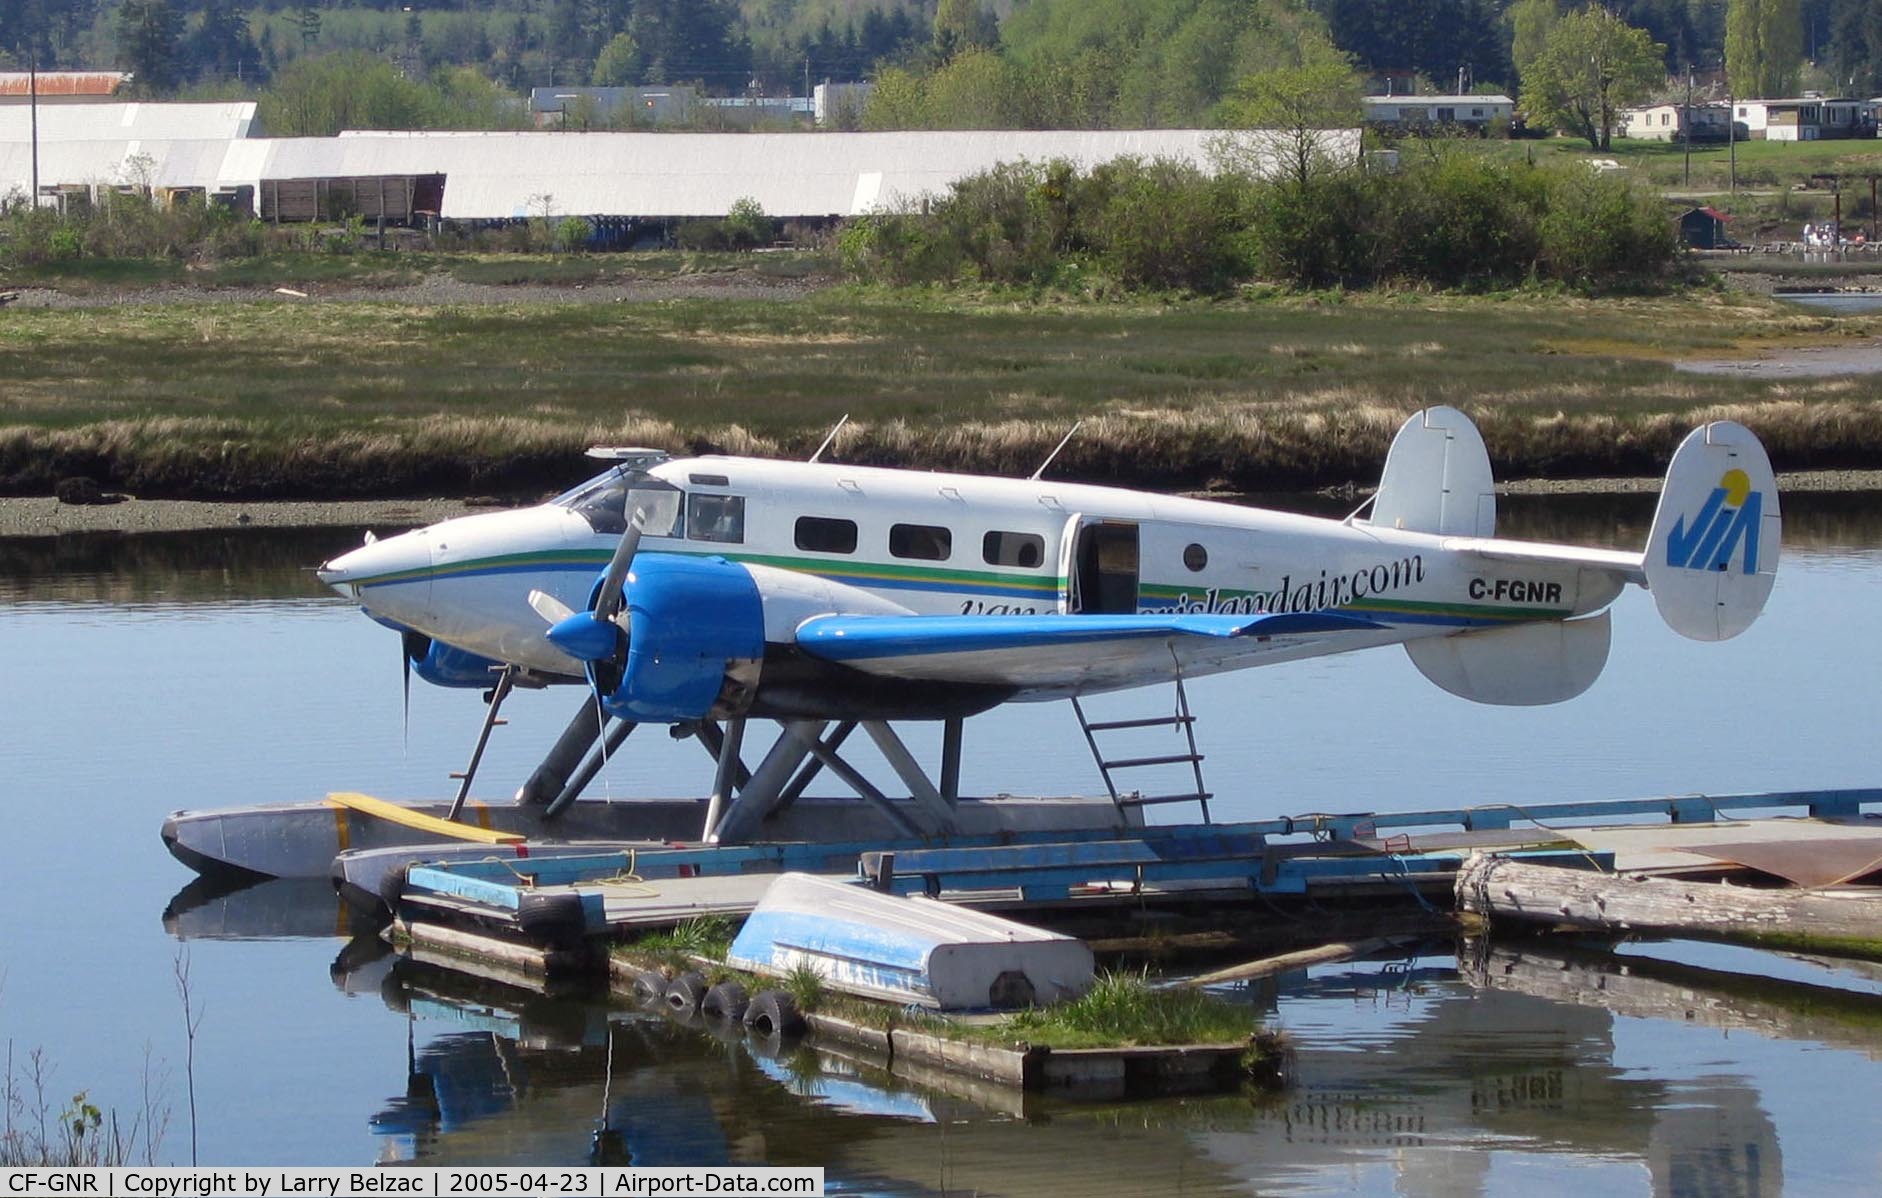 CF-GNR, 1952 Beech Expeditor 3NM C/N CA-191, Dock side Campbell River, Vancouver Island